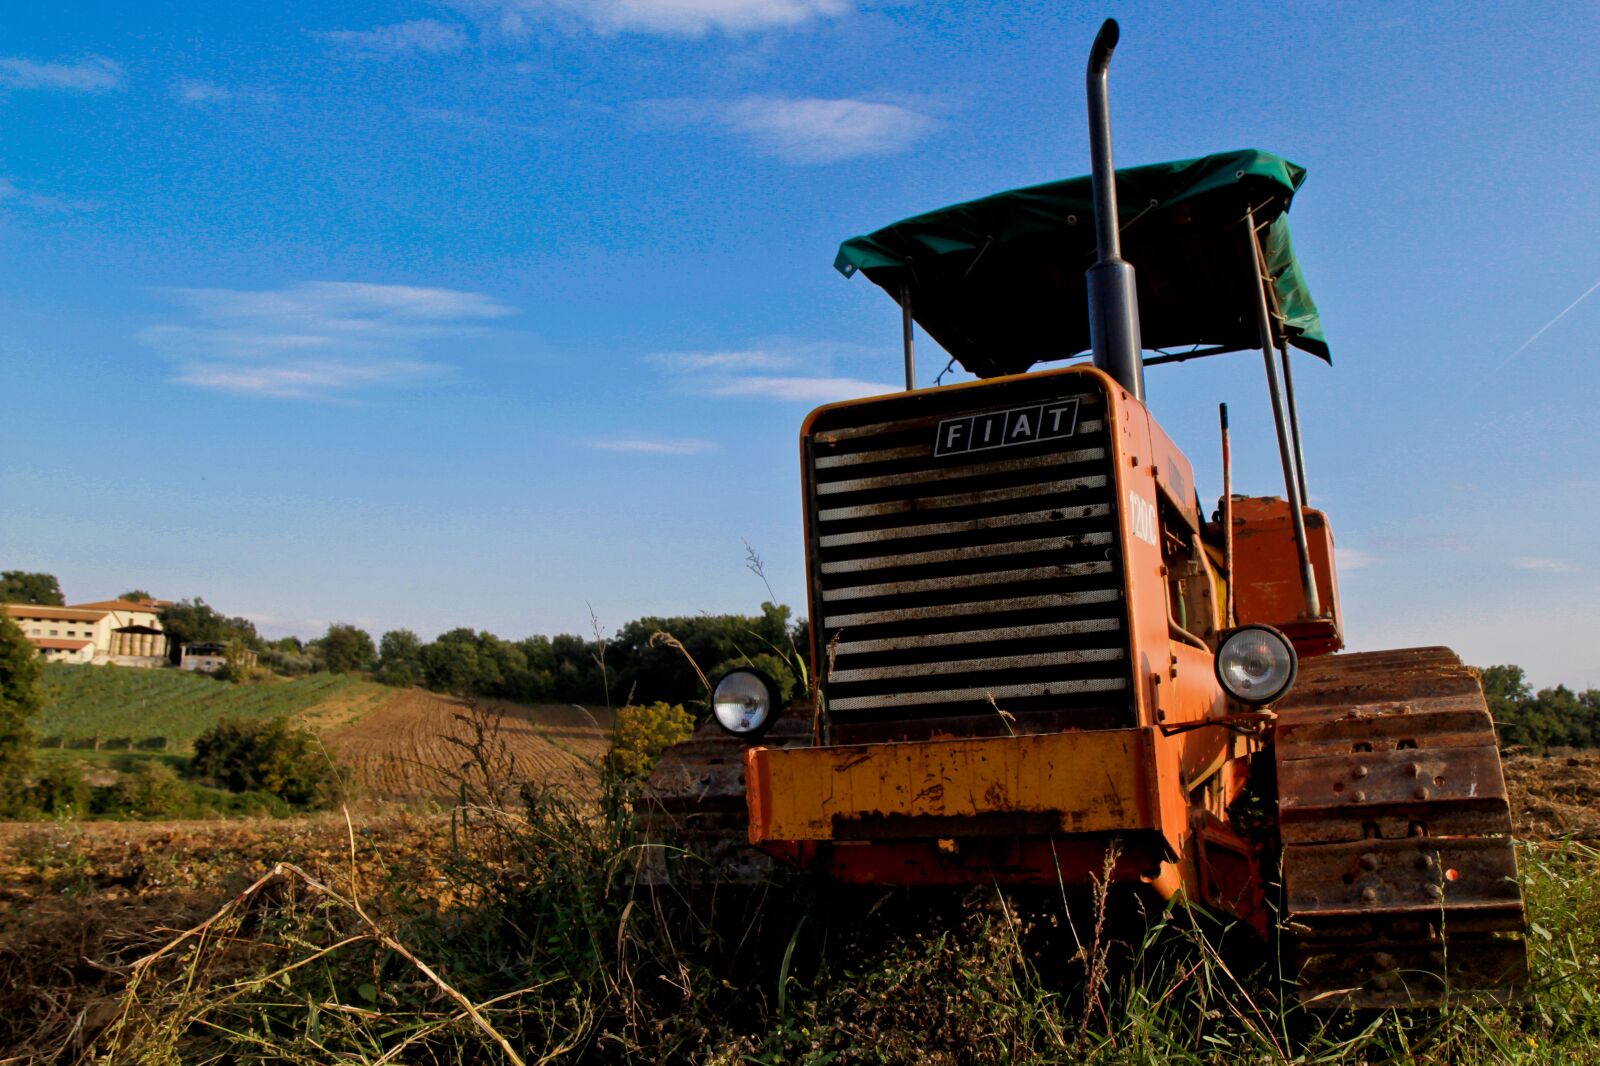 Canon EOS 60D + Sigma 12-24mm f/4.5-5.6 EX DG ASPHERICAL HSM + 1.4x sample photo. Tractor, fiat, agriculture photography